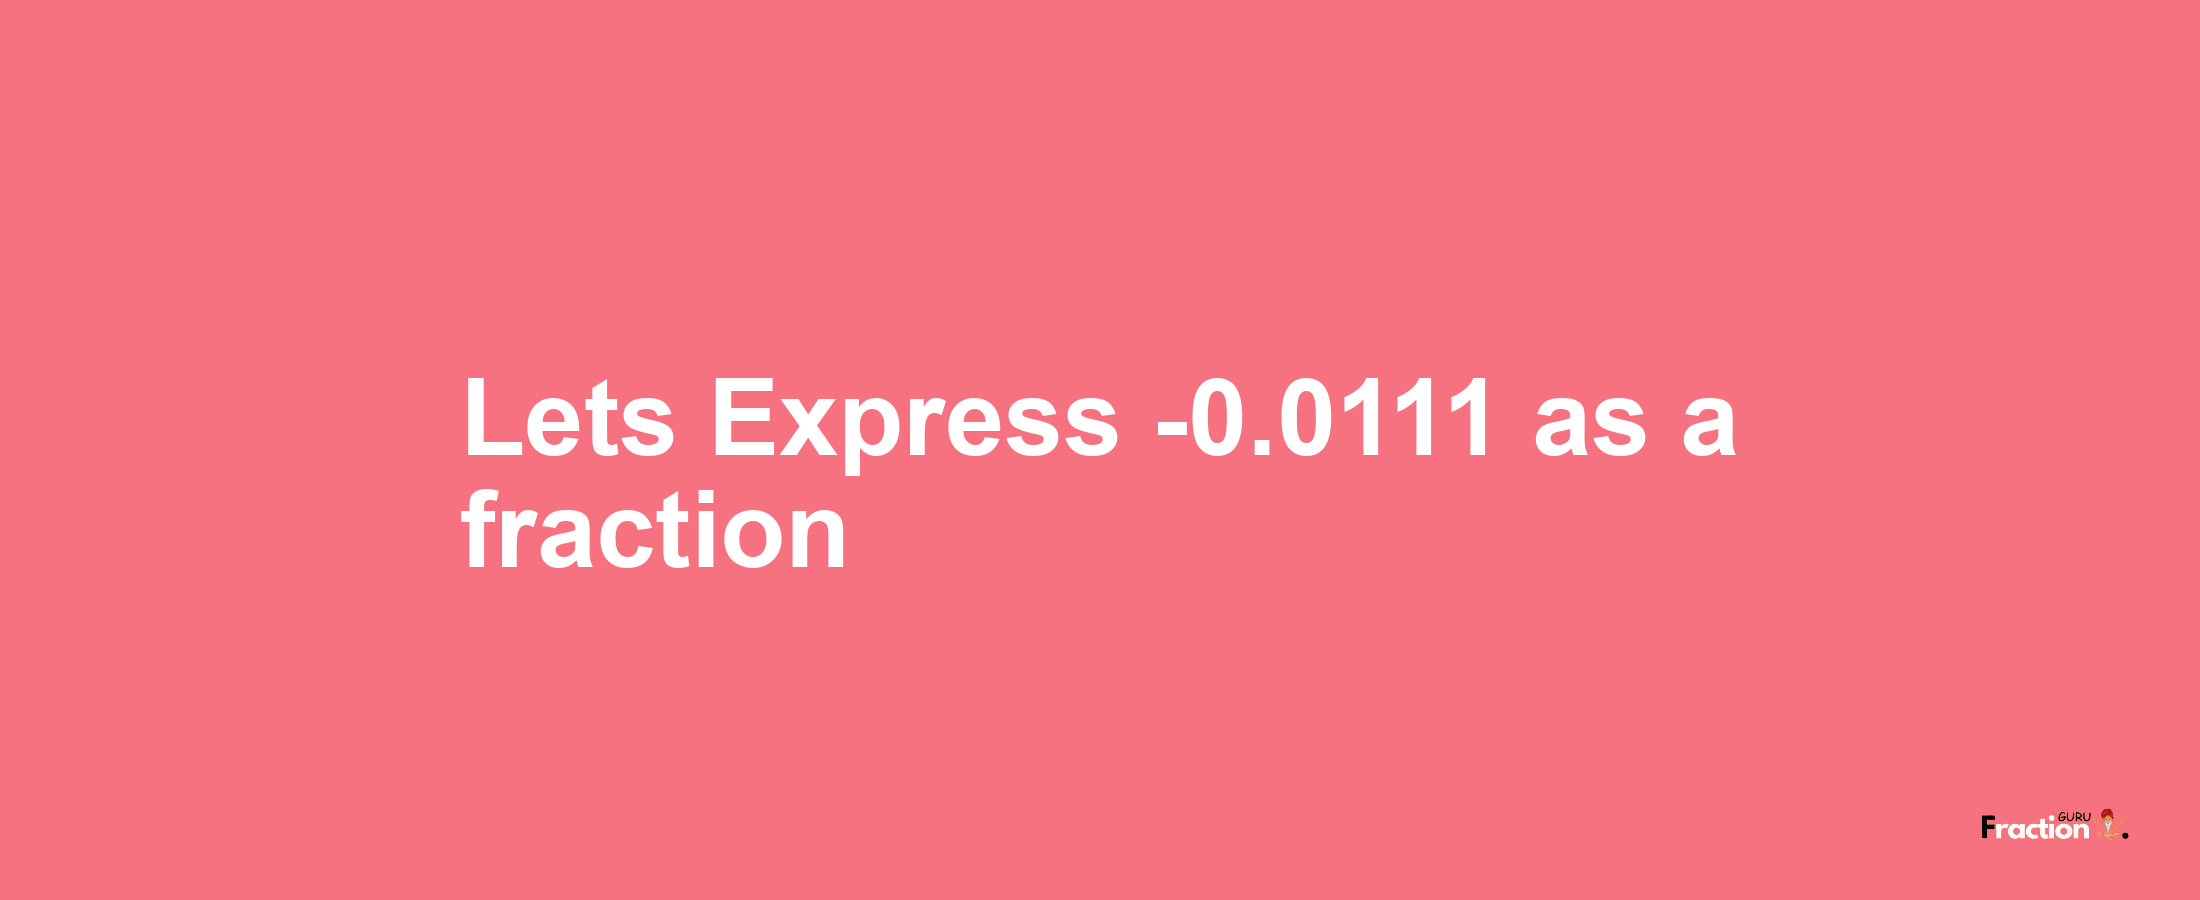 Lets Express -0.0111 as afraction